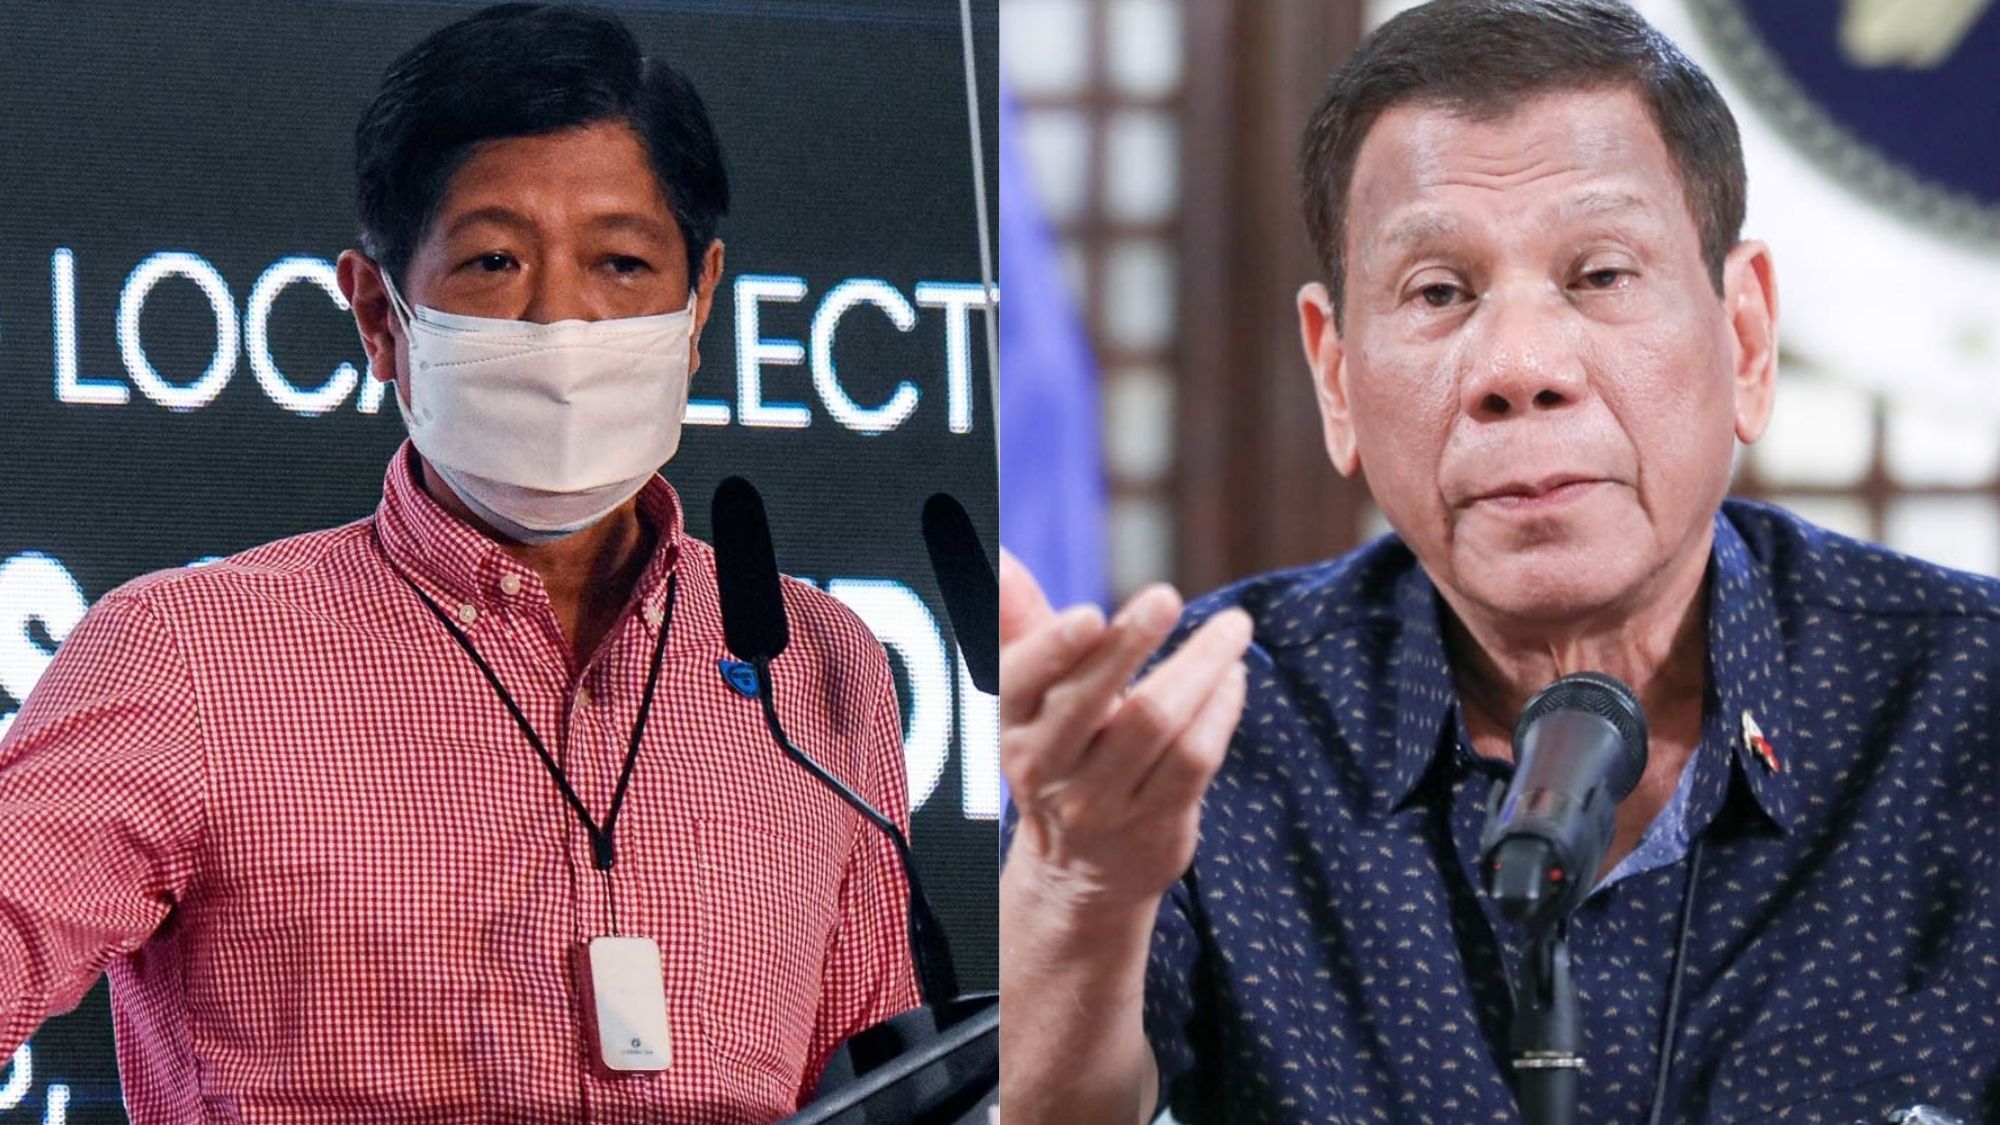 Is it a real war between Duterte and Marcos